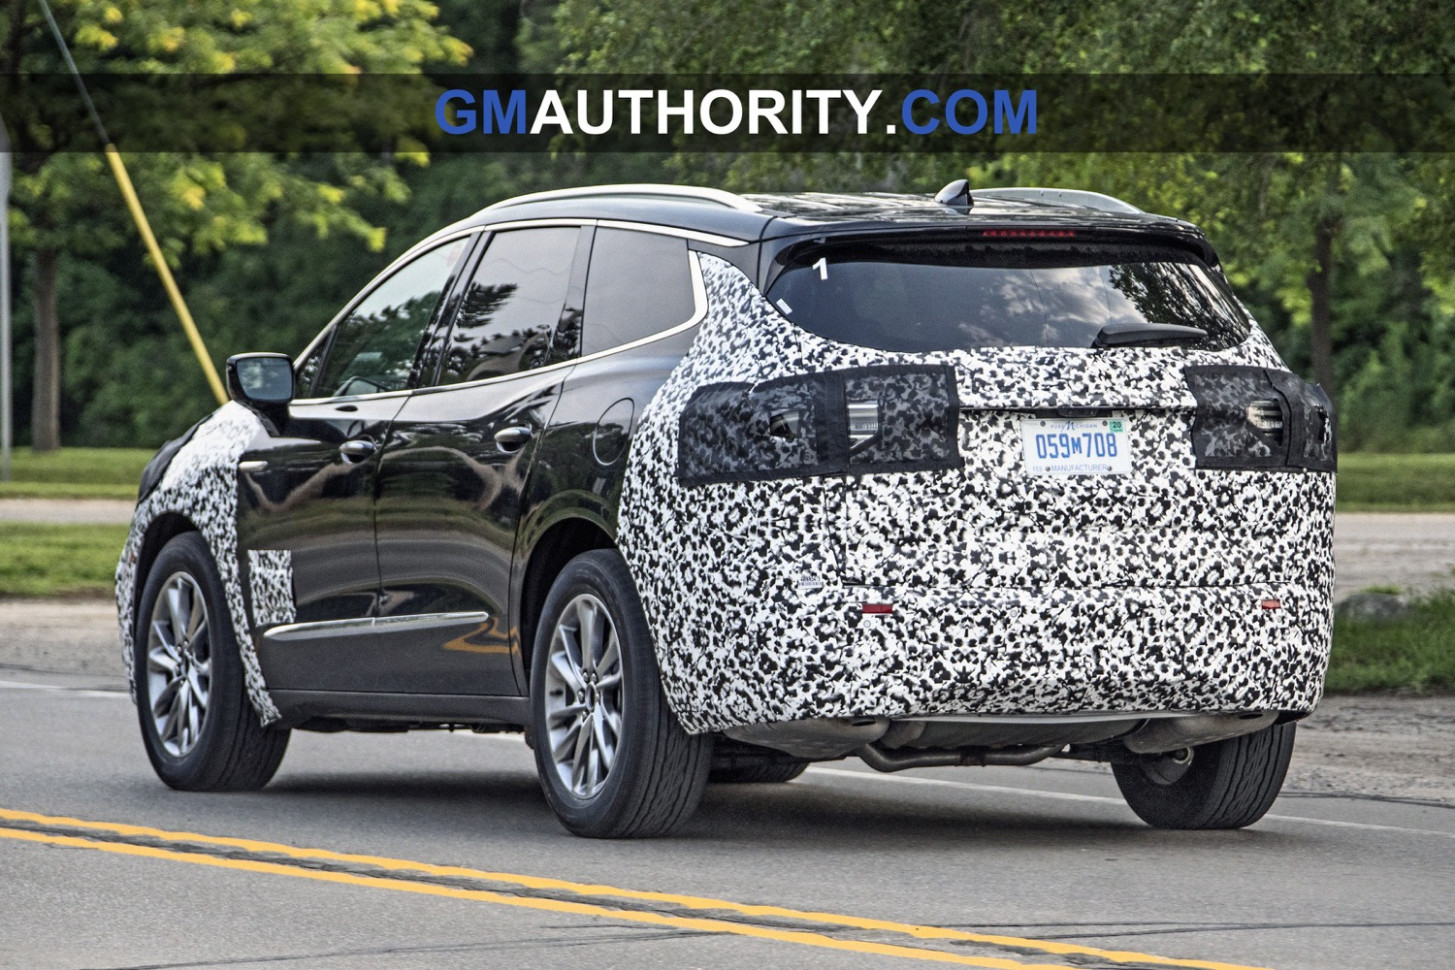 Overview 2022 Buick Enclave Spy Photos